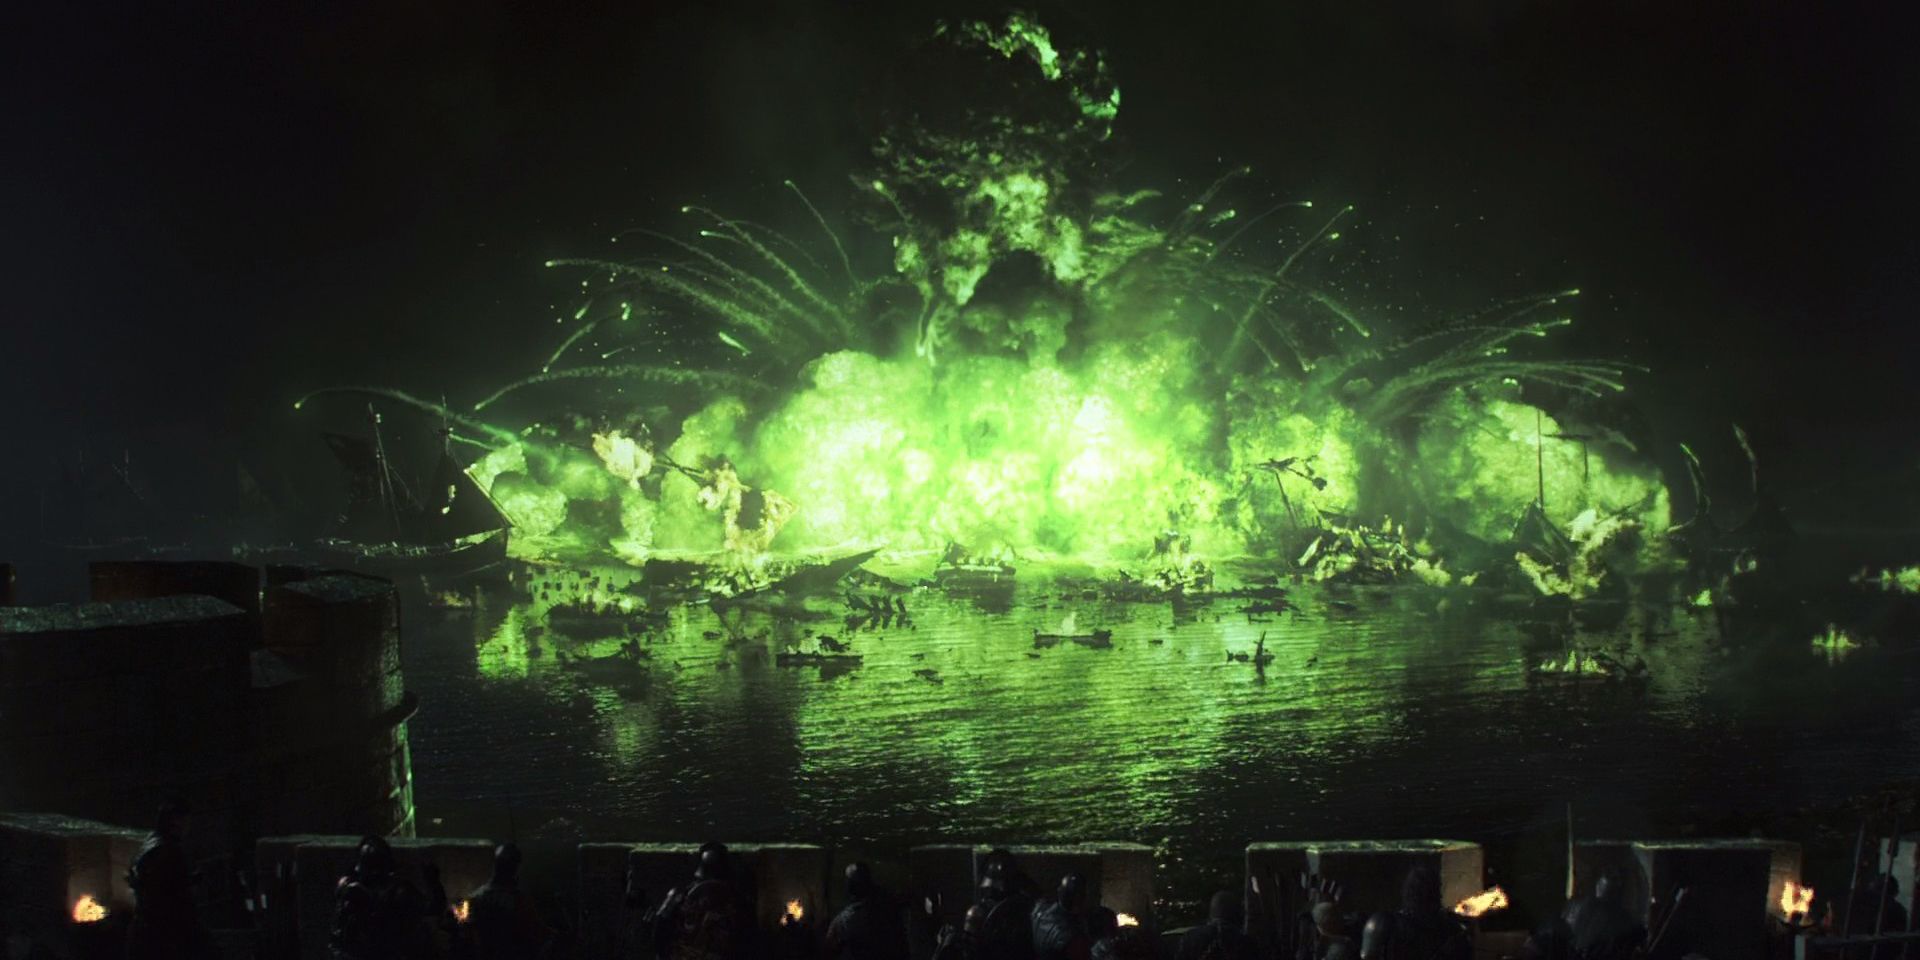 Explosion At The Battle Of Blackwater on Game of Thrones